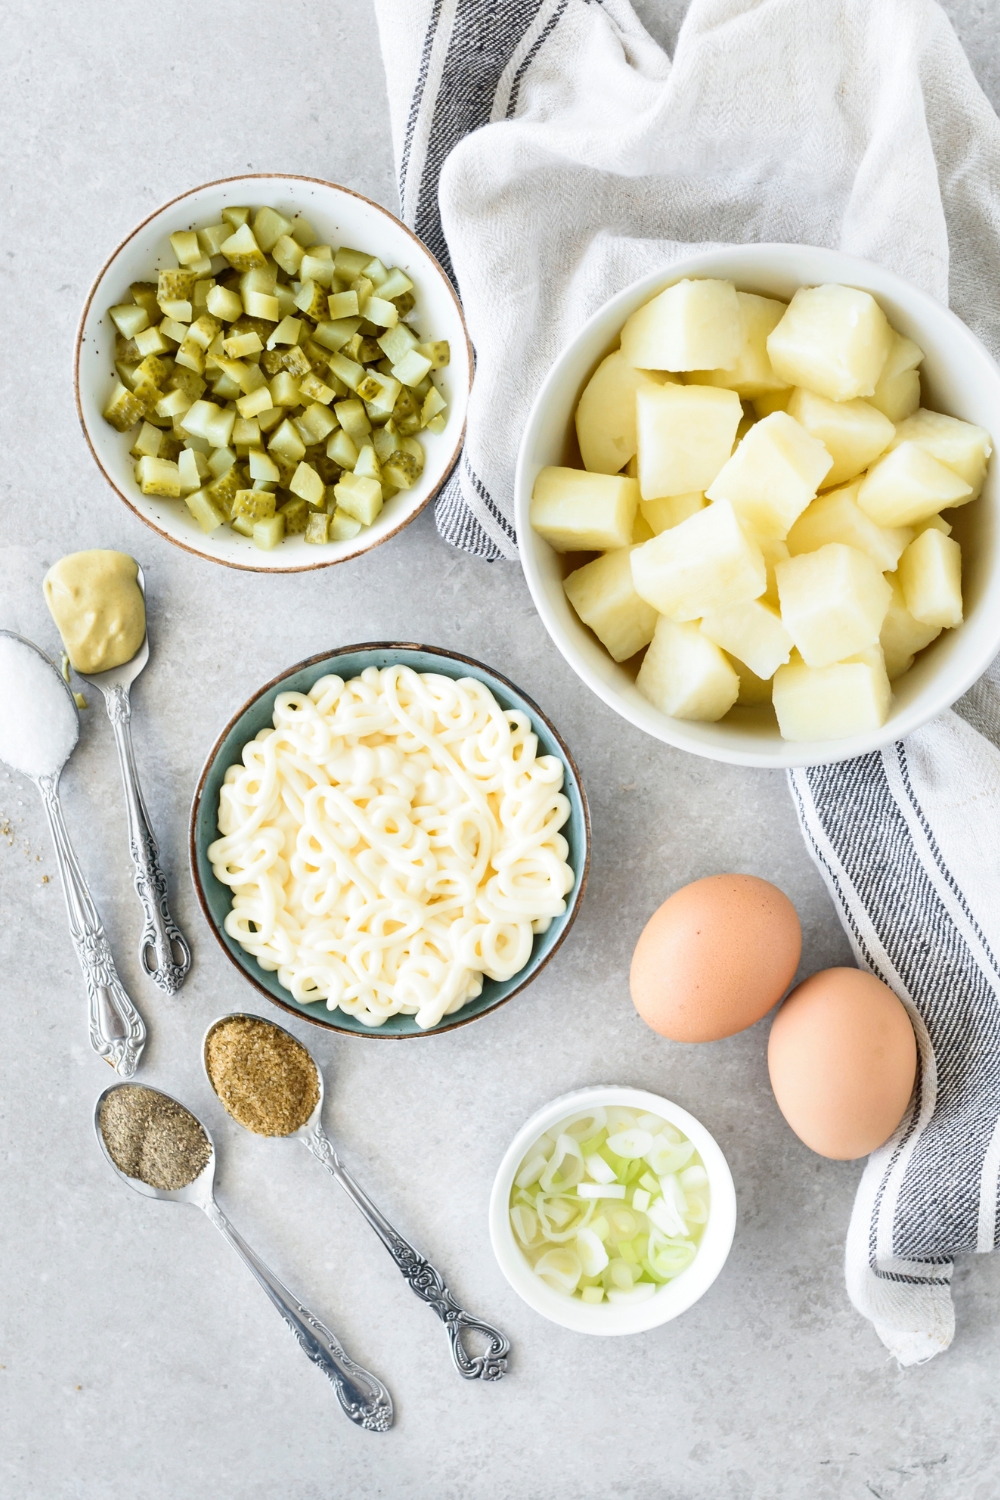 A countertop with diced potatoes, diced pickles, mayo, mustard, seasonings, eggs, and green onions in various bowls.